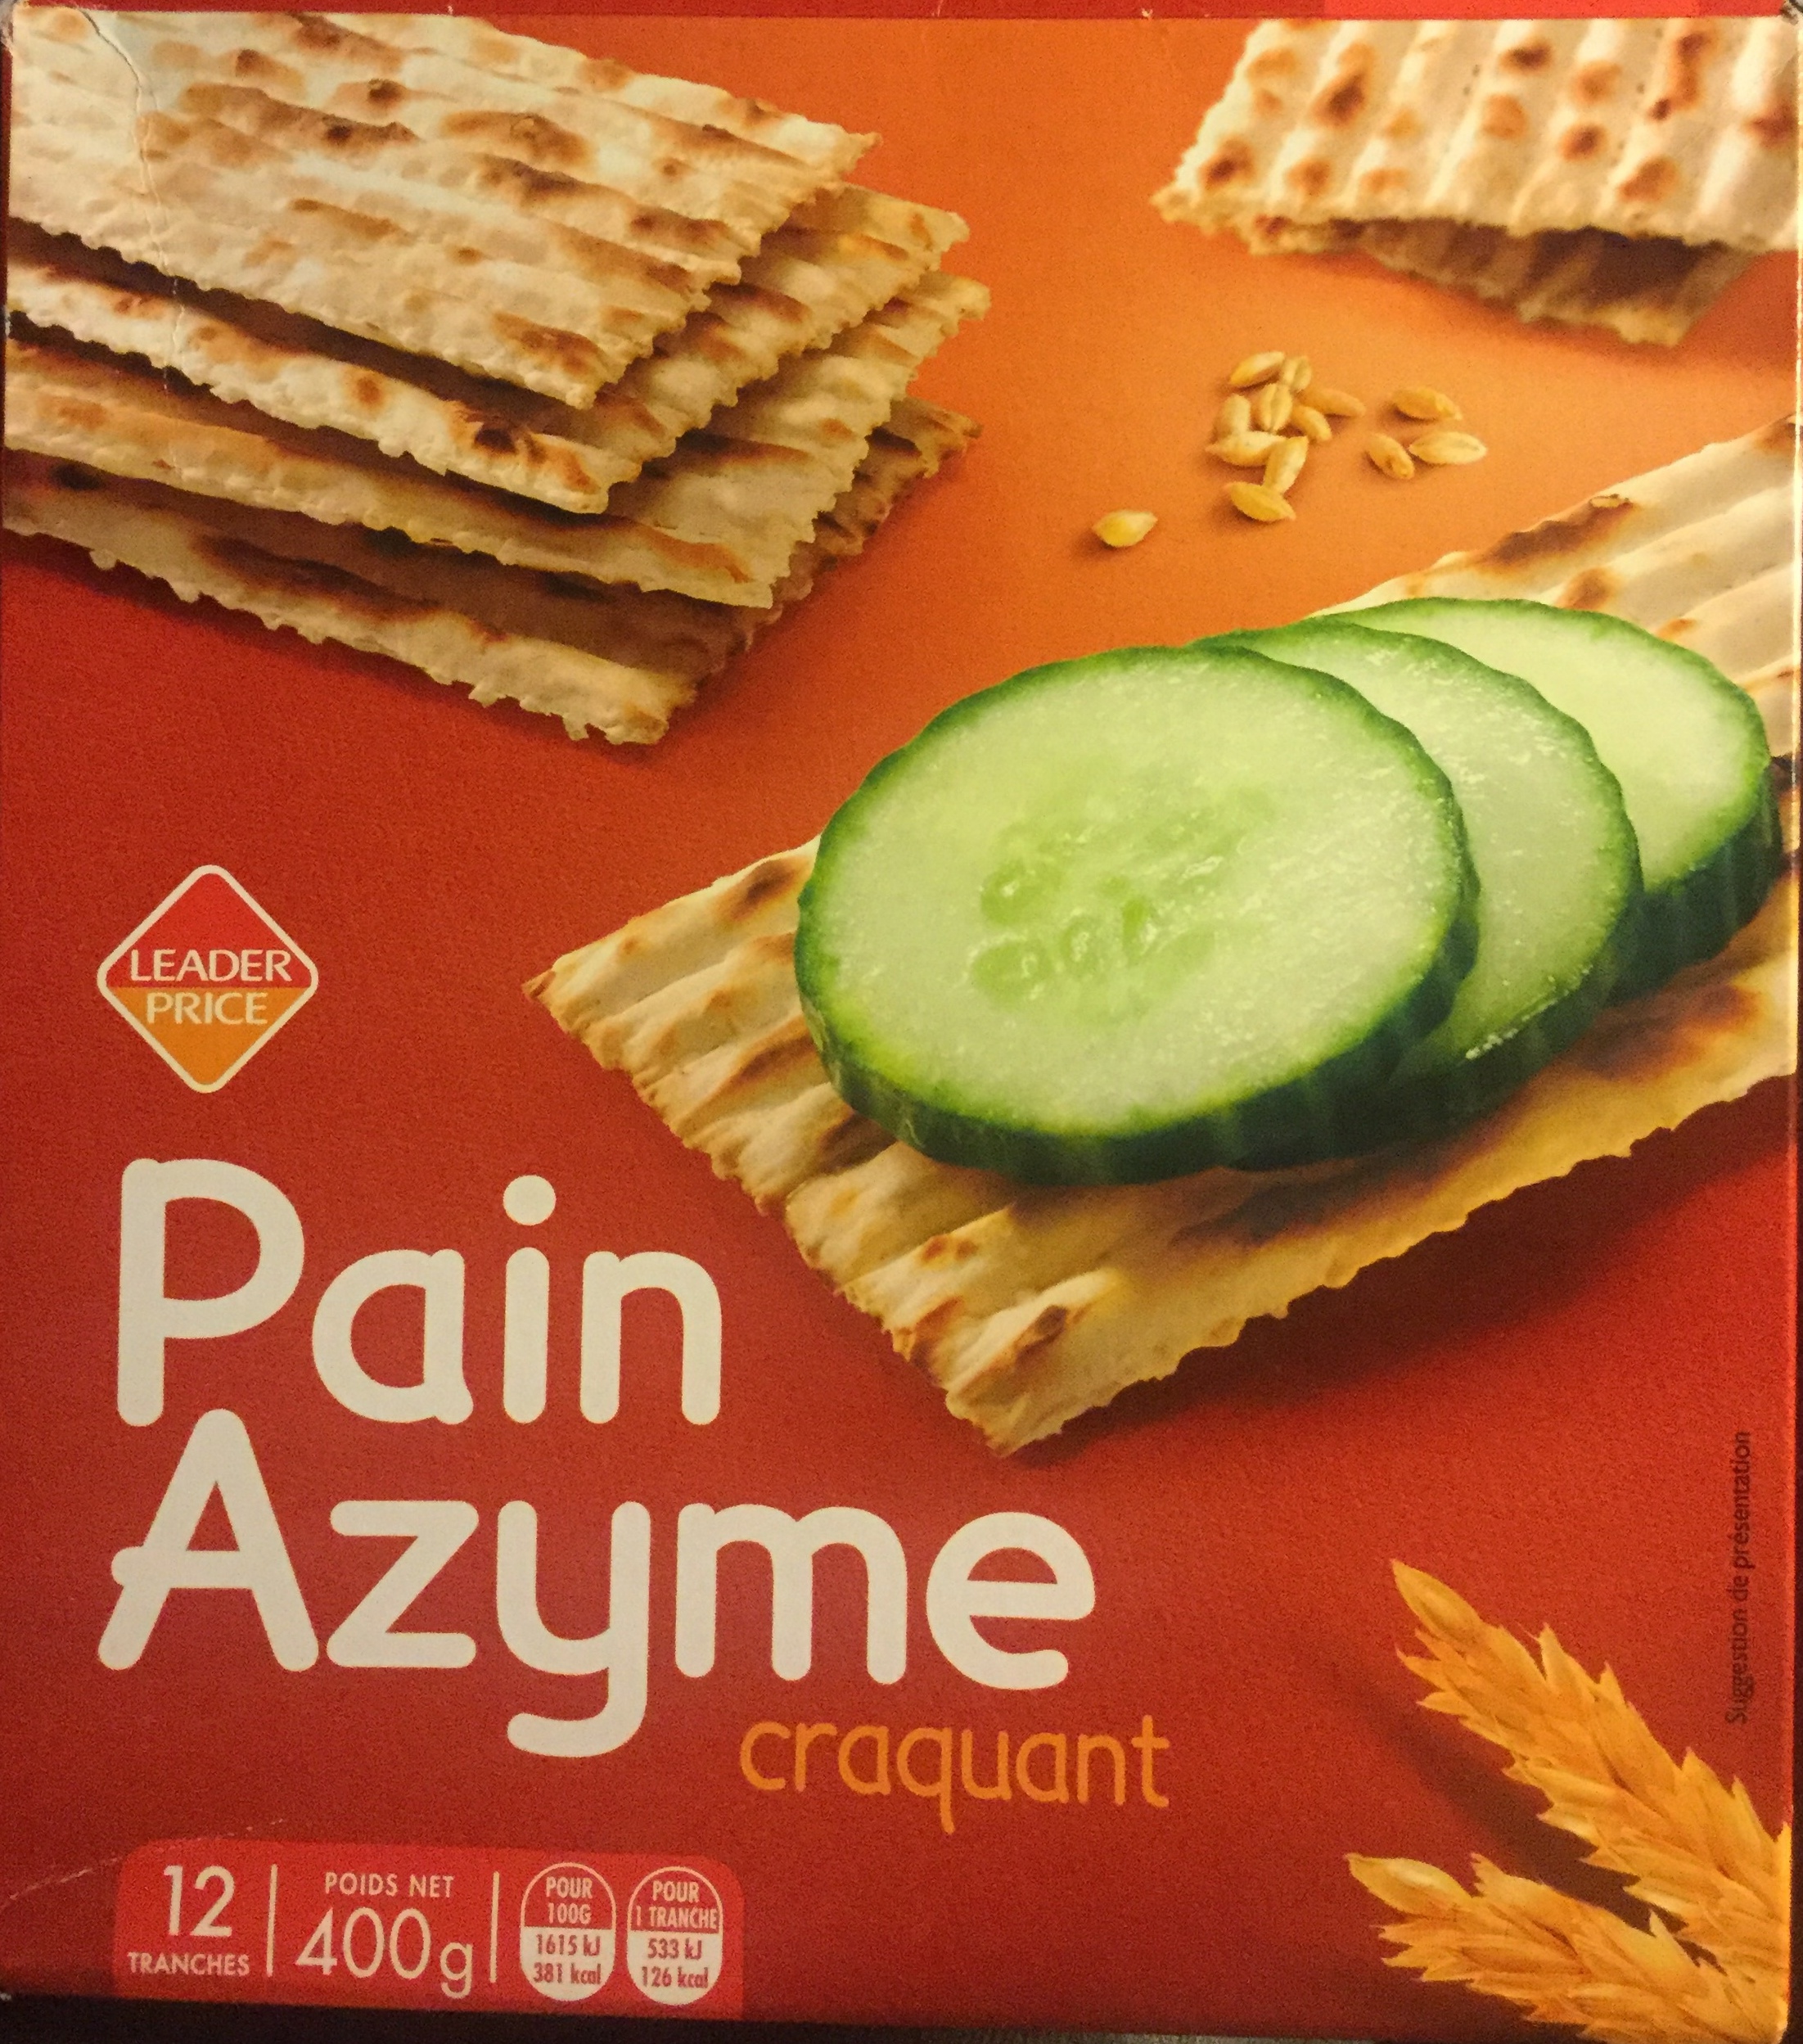 Pain azyme craquant - Producto - fr